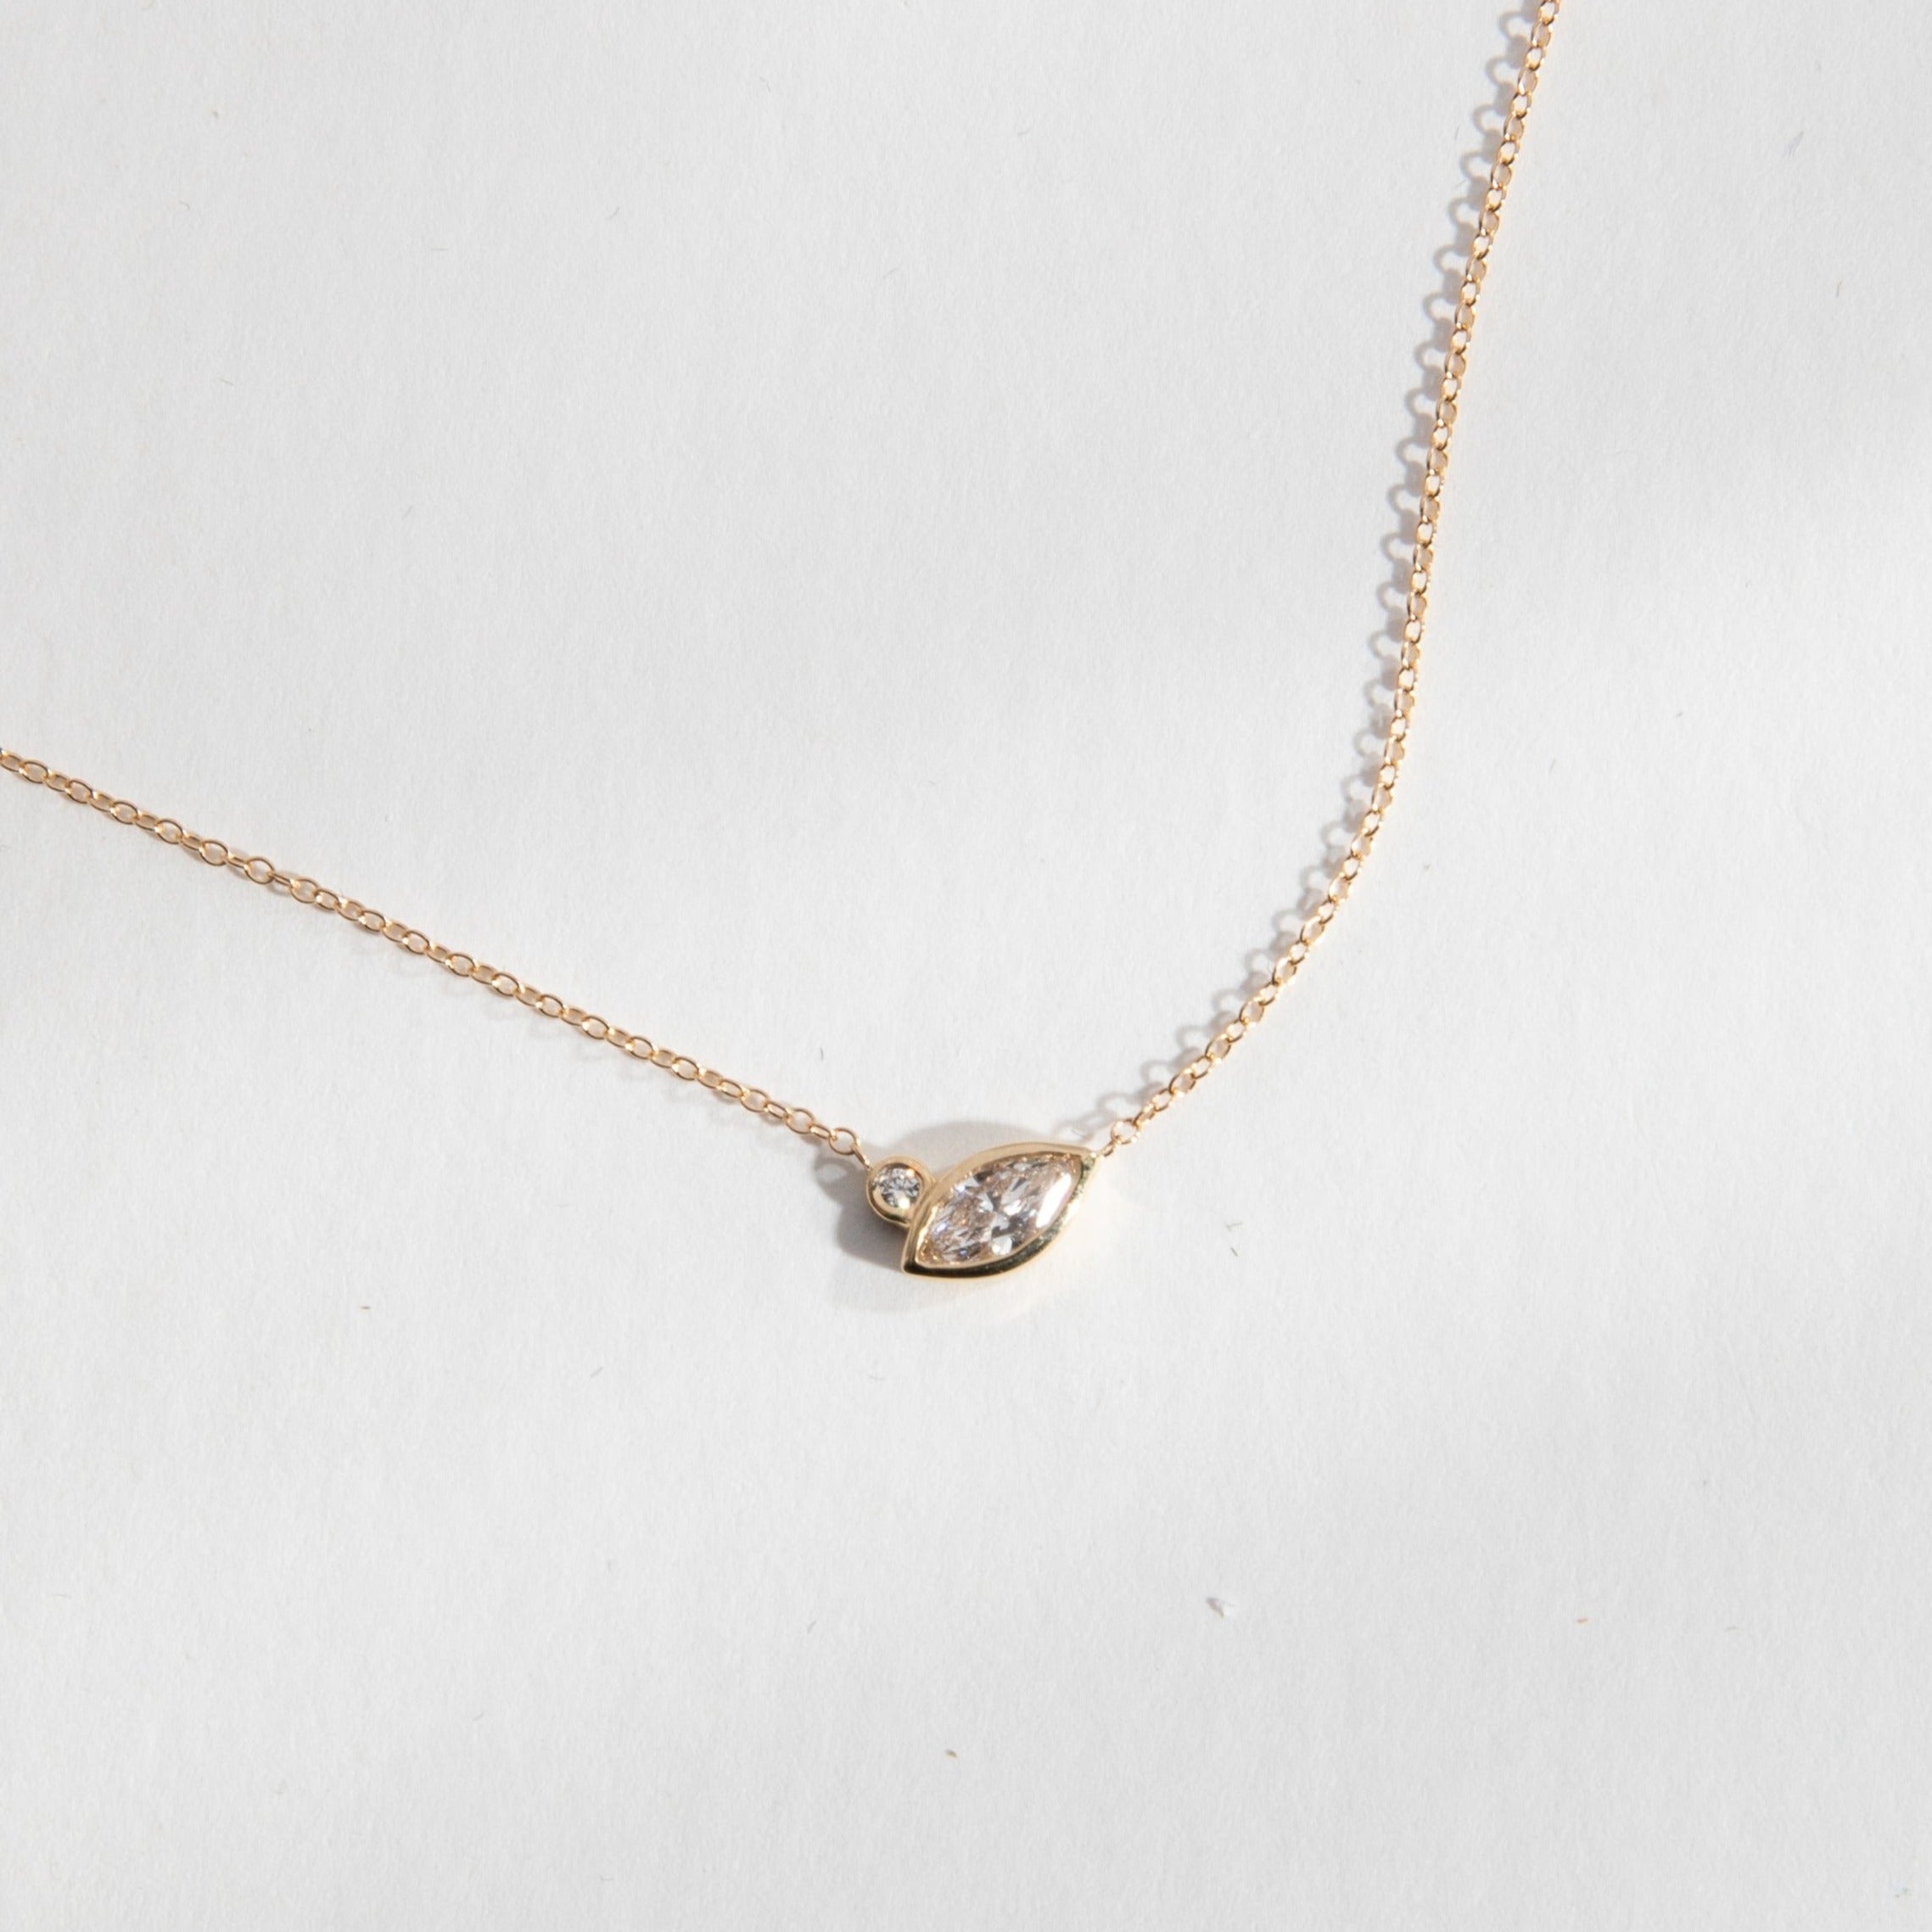 Liepa Delicate Necklace in 14k Gold set with lab-grown diamonds By SHW Fine Jewelry NYC